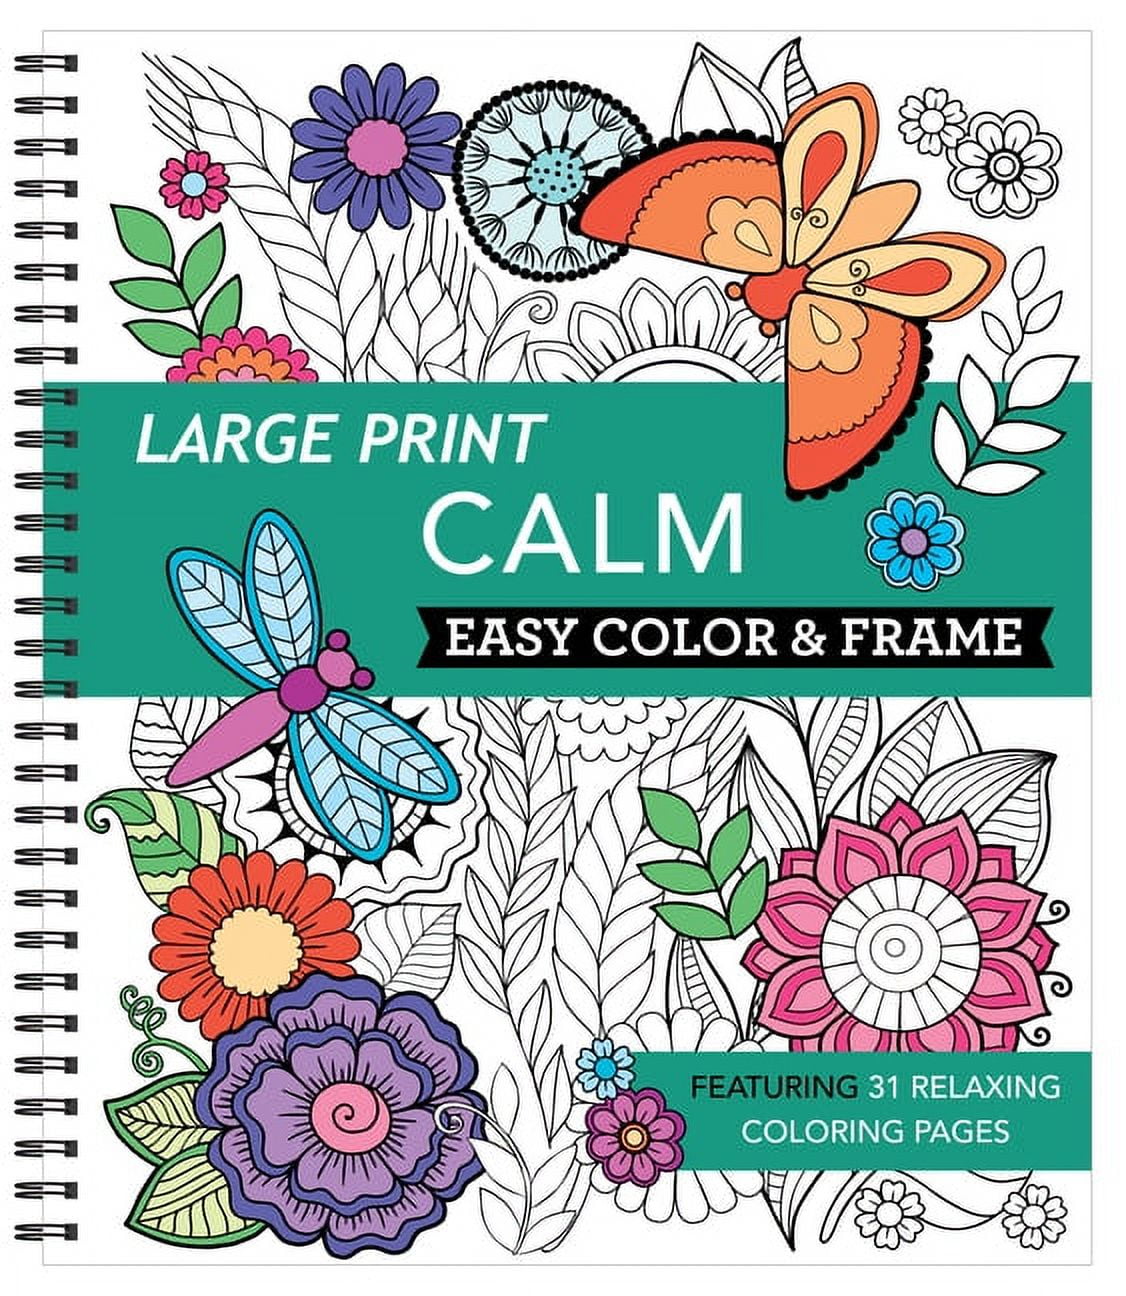 Large Print Color By Number Adult Coloring Book: 50 Coloring Pages